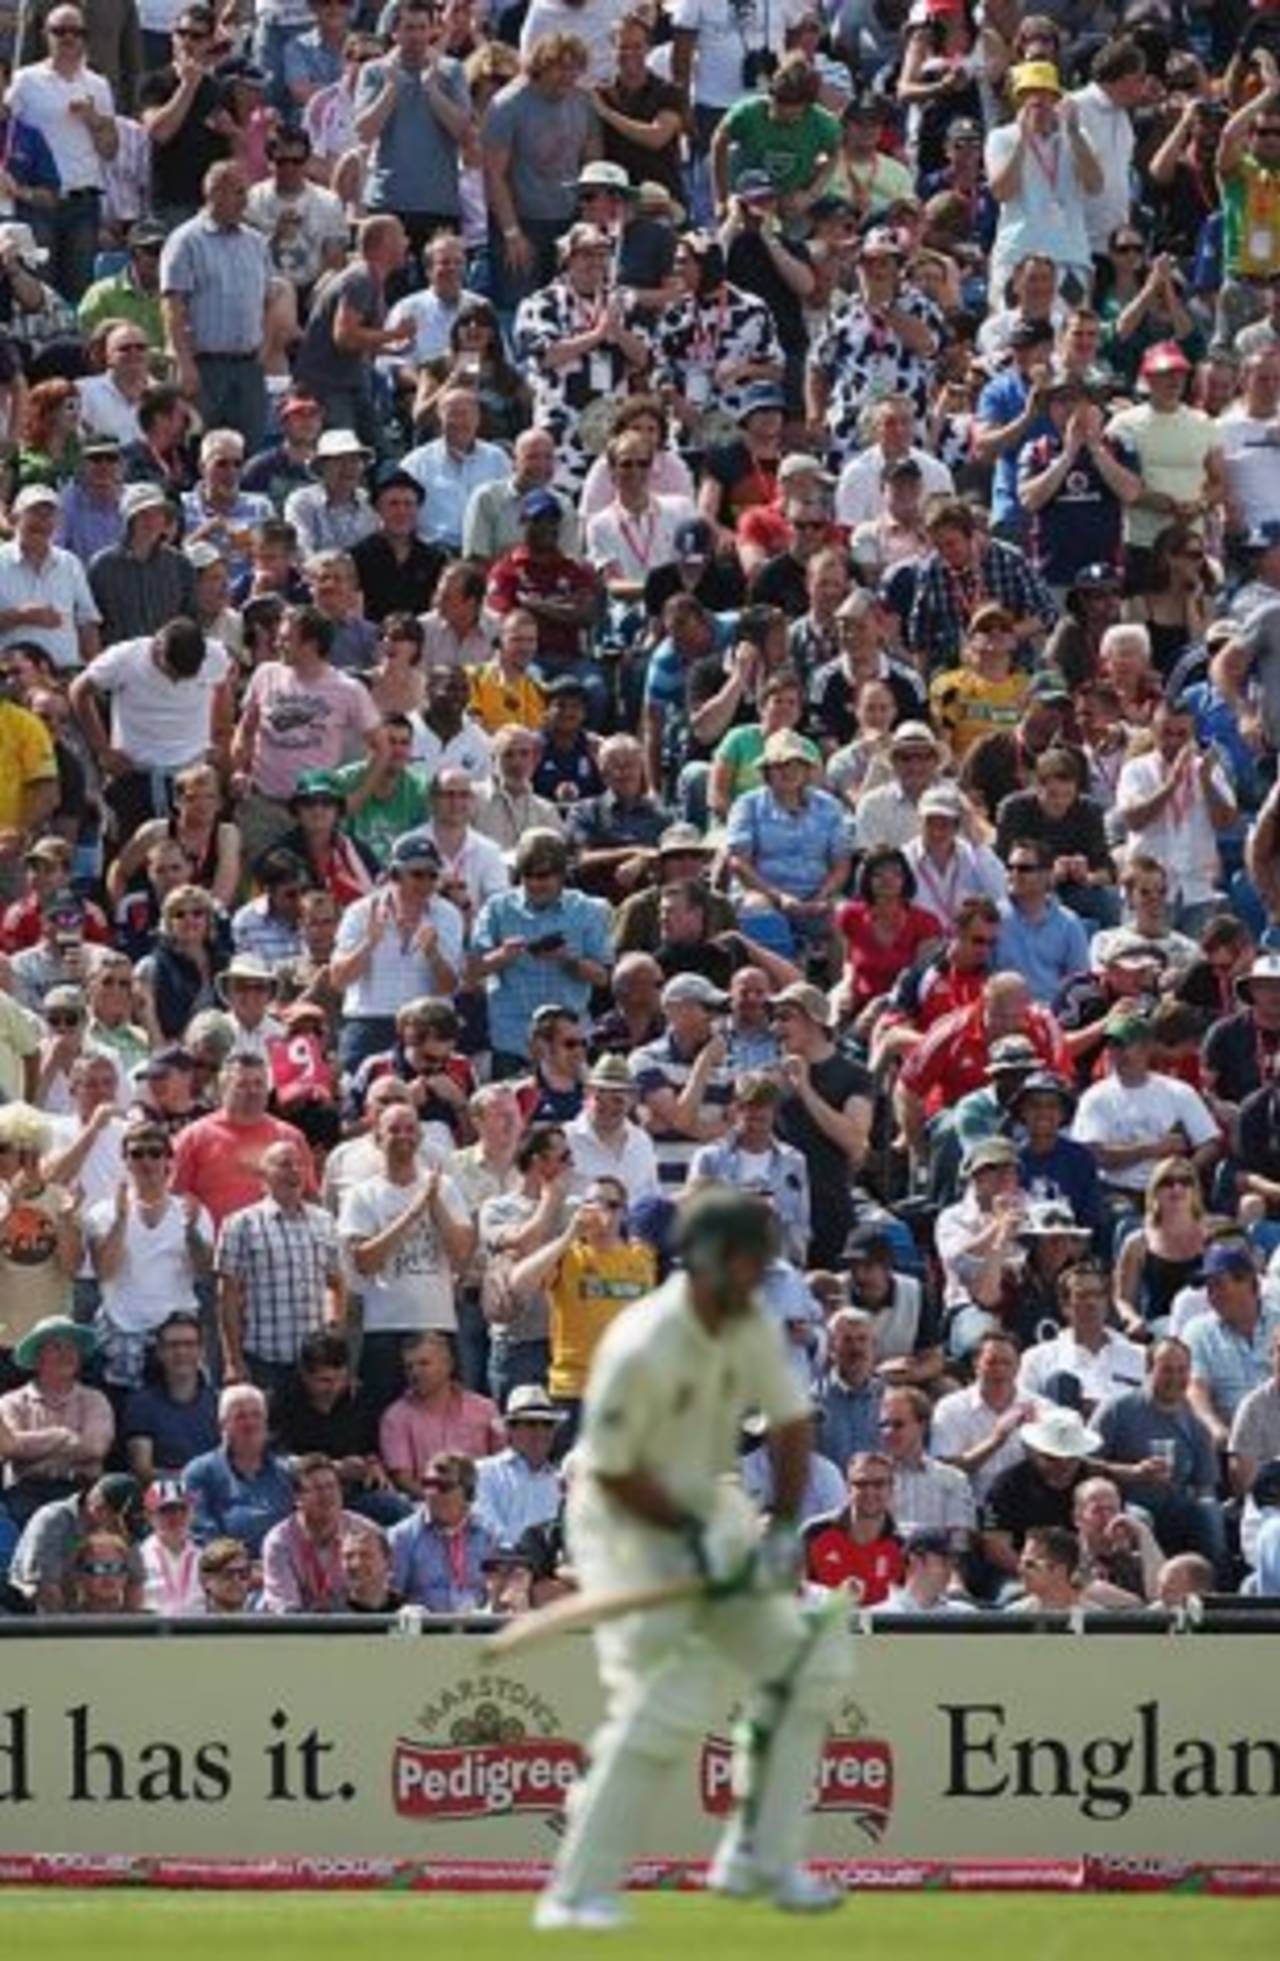 Ricky Ponting was booed by the Headingley crowd, England v Australia, 4th Test, Headingley, 1st day, August 7, 2009